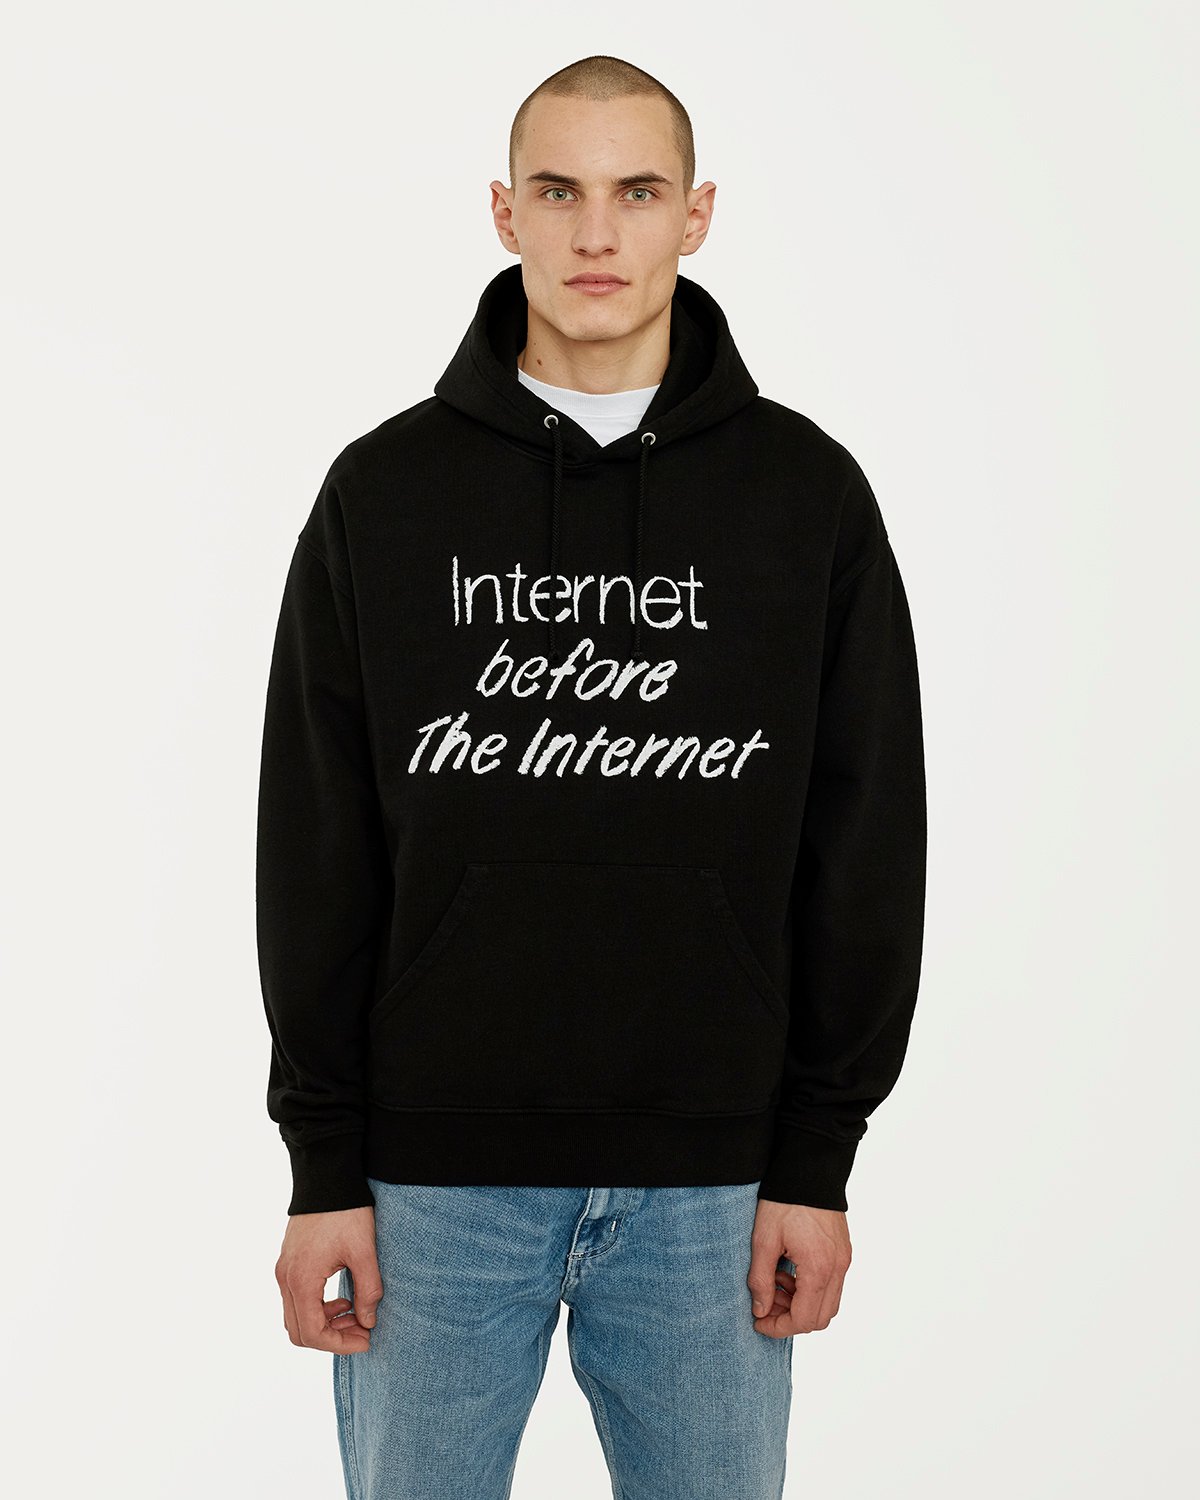 Colette Mon Amour - The Internet Before The Internet Hoodie Black - Clothing - Black - Image 2